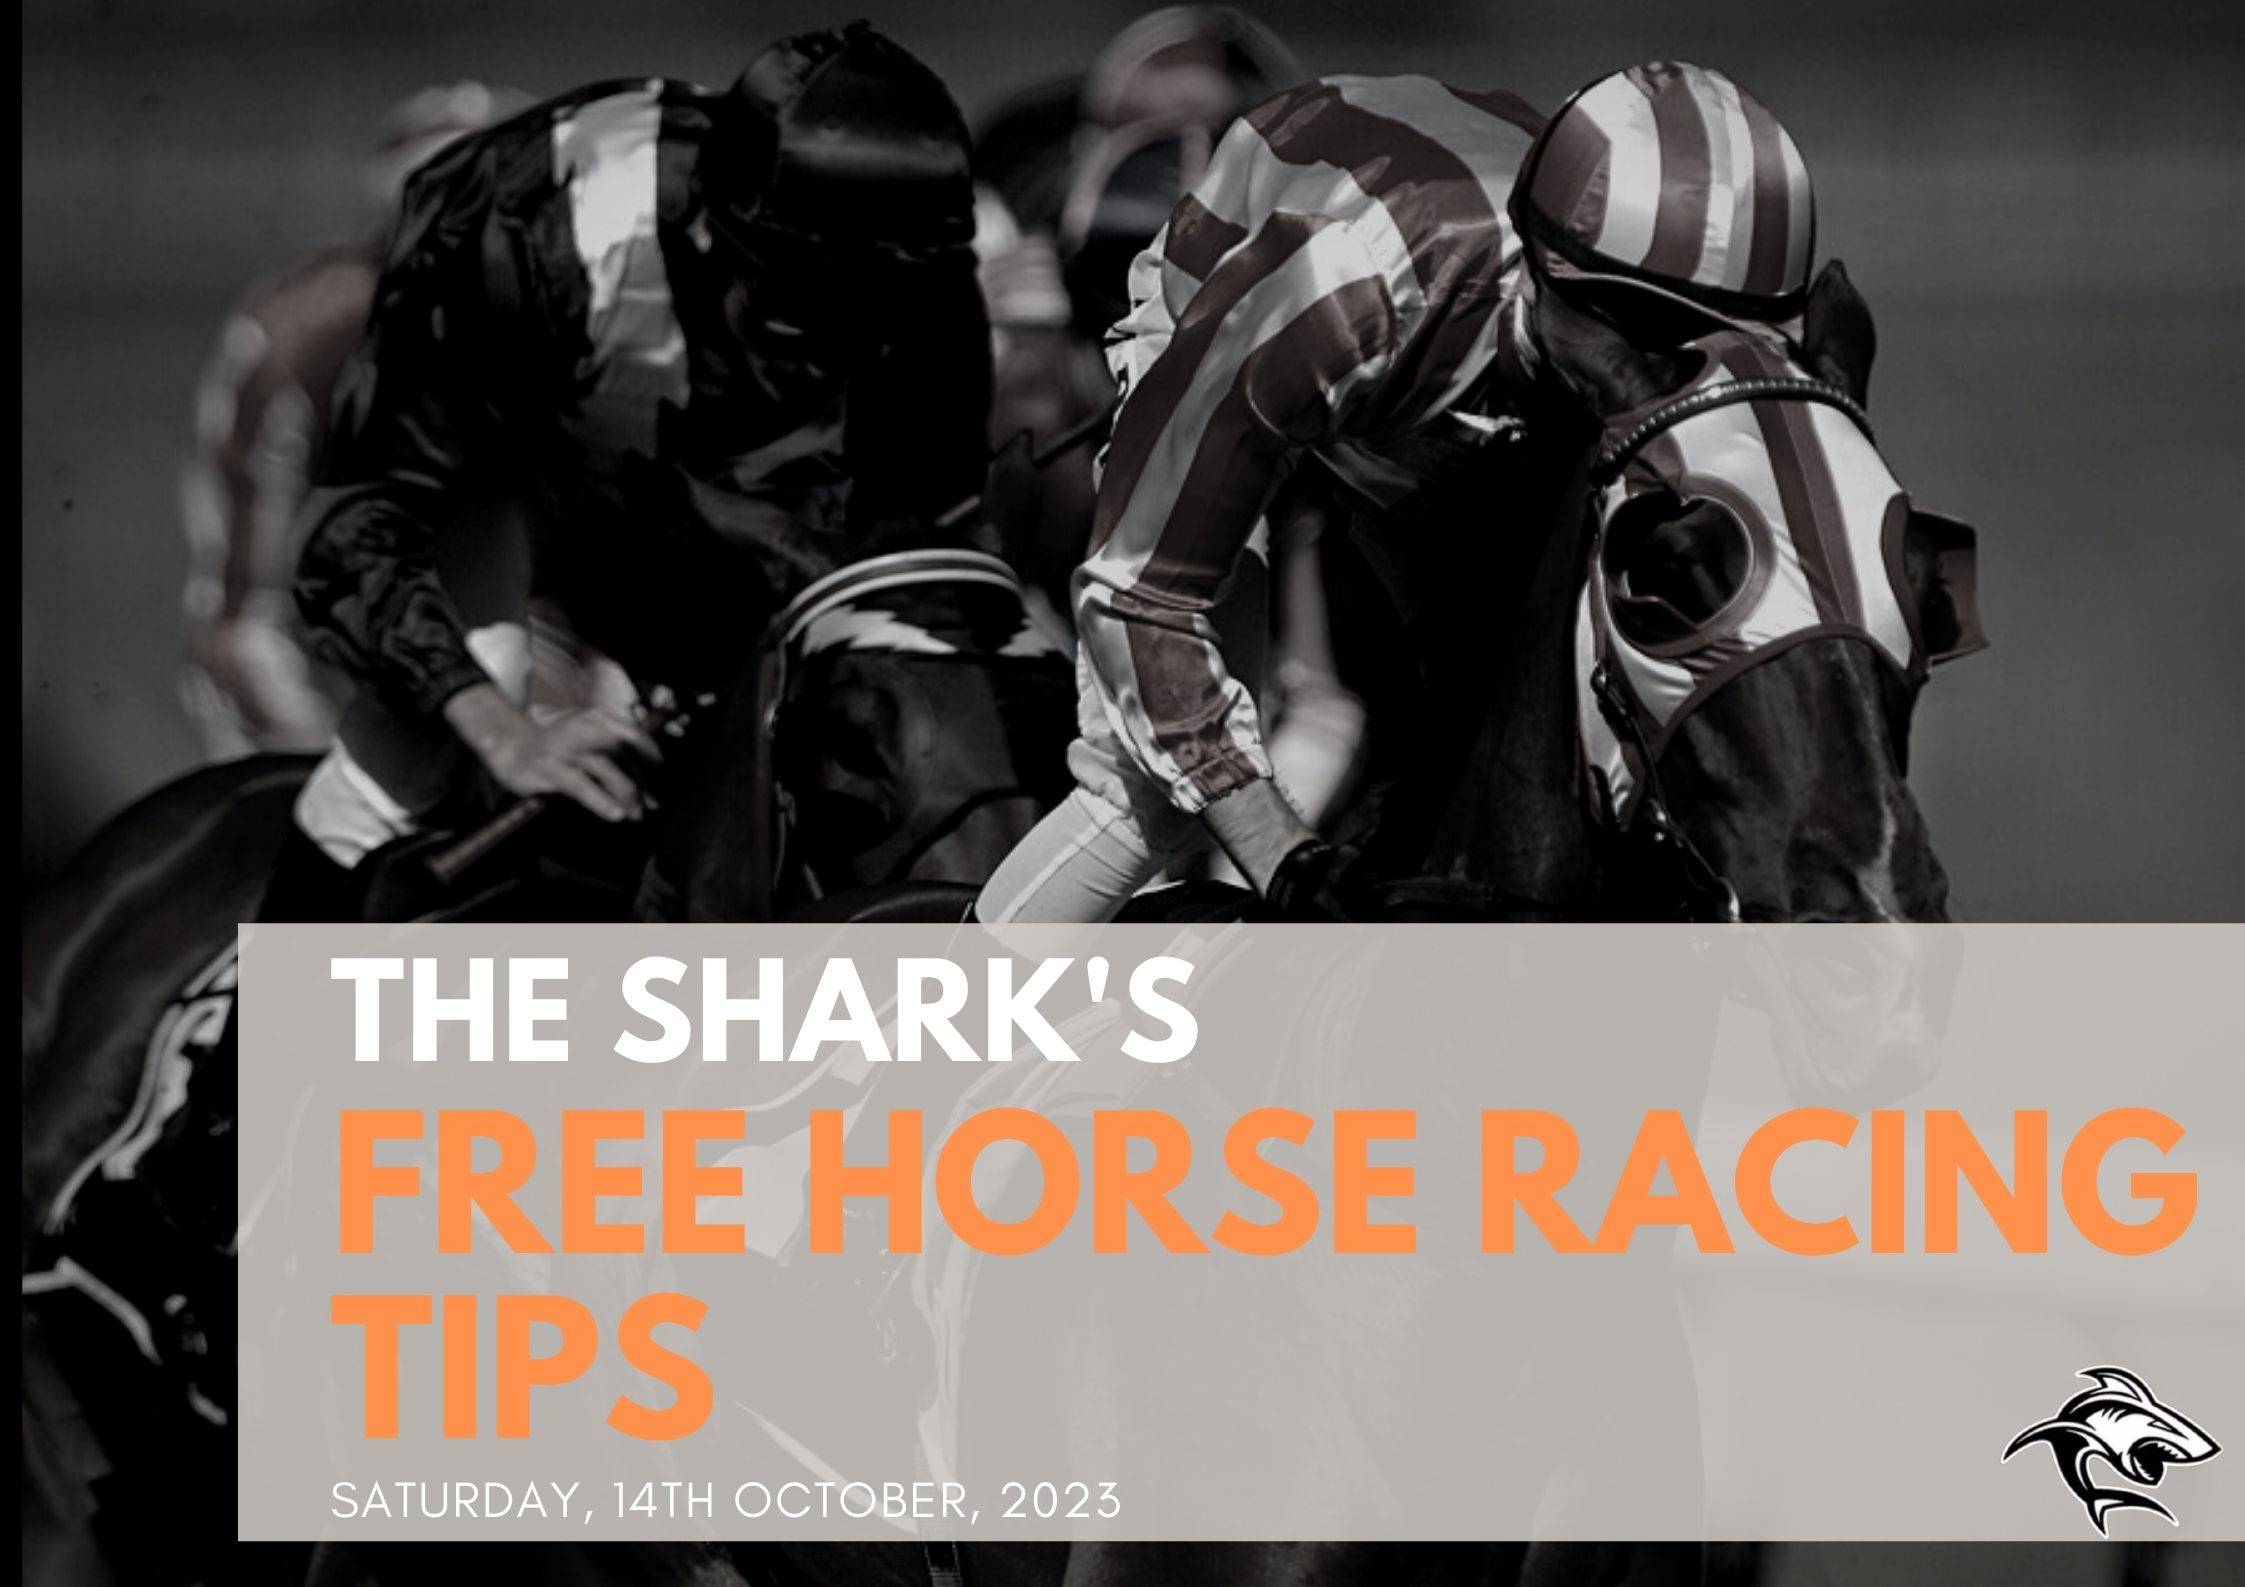 Free Horse Racing Tips - 14th Oct